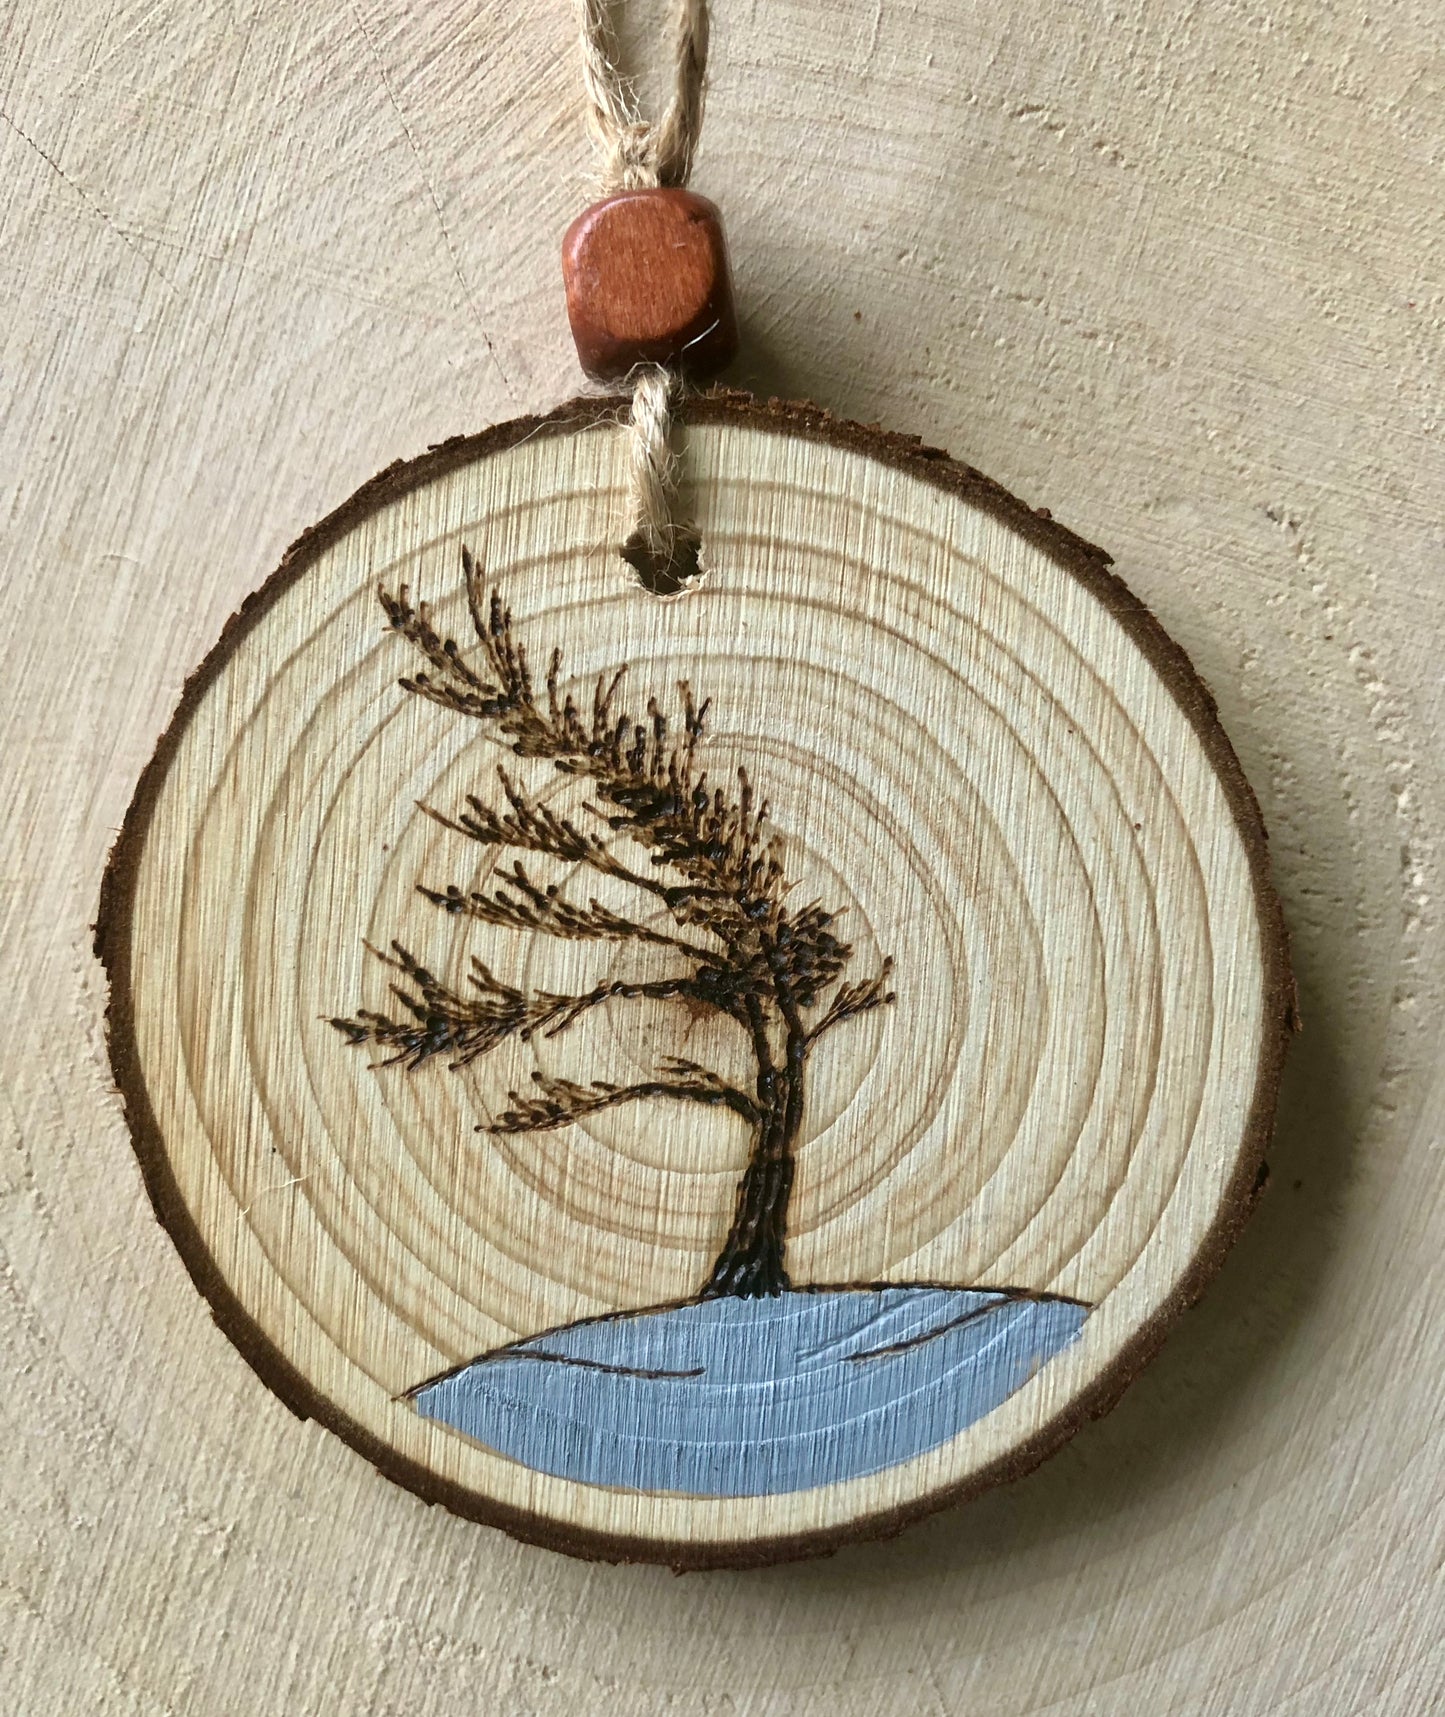 Wood burned and hand painted gift tags / tree ornaments